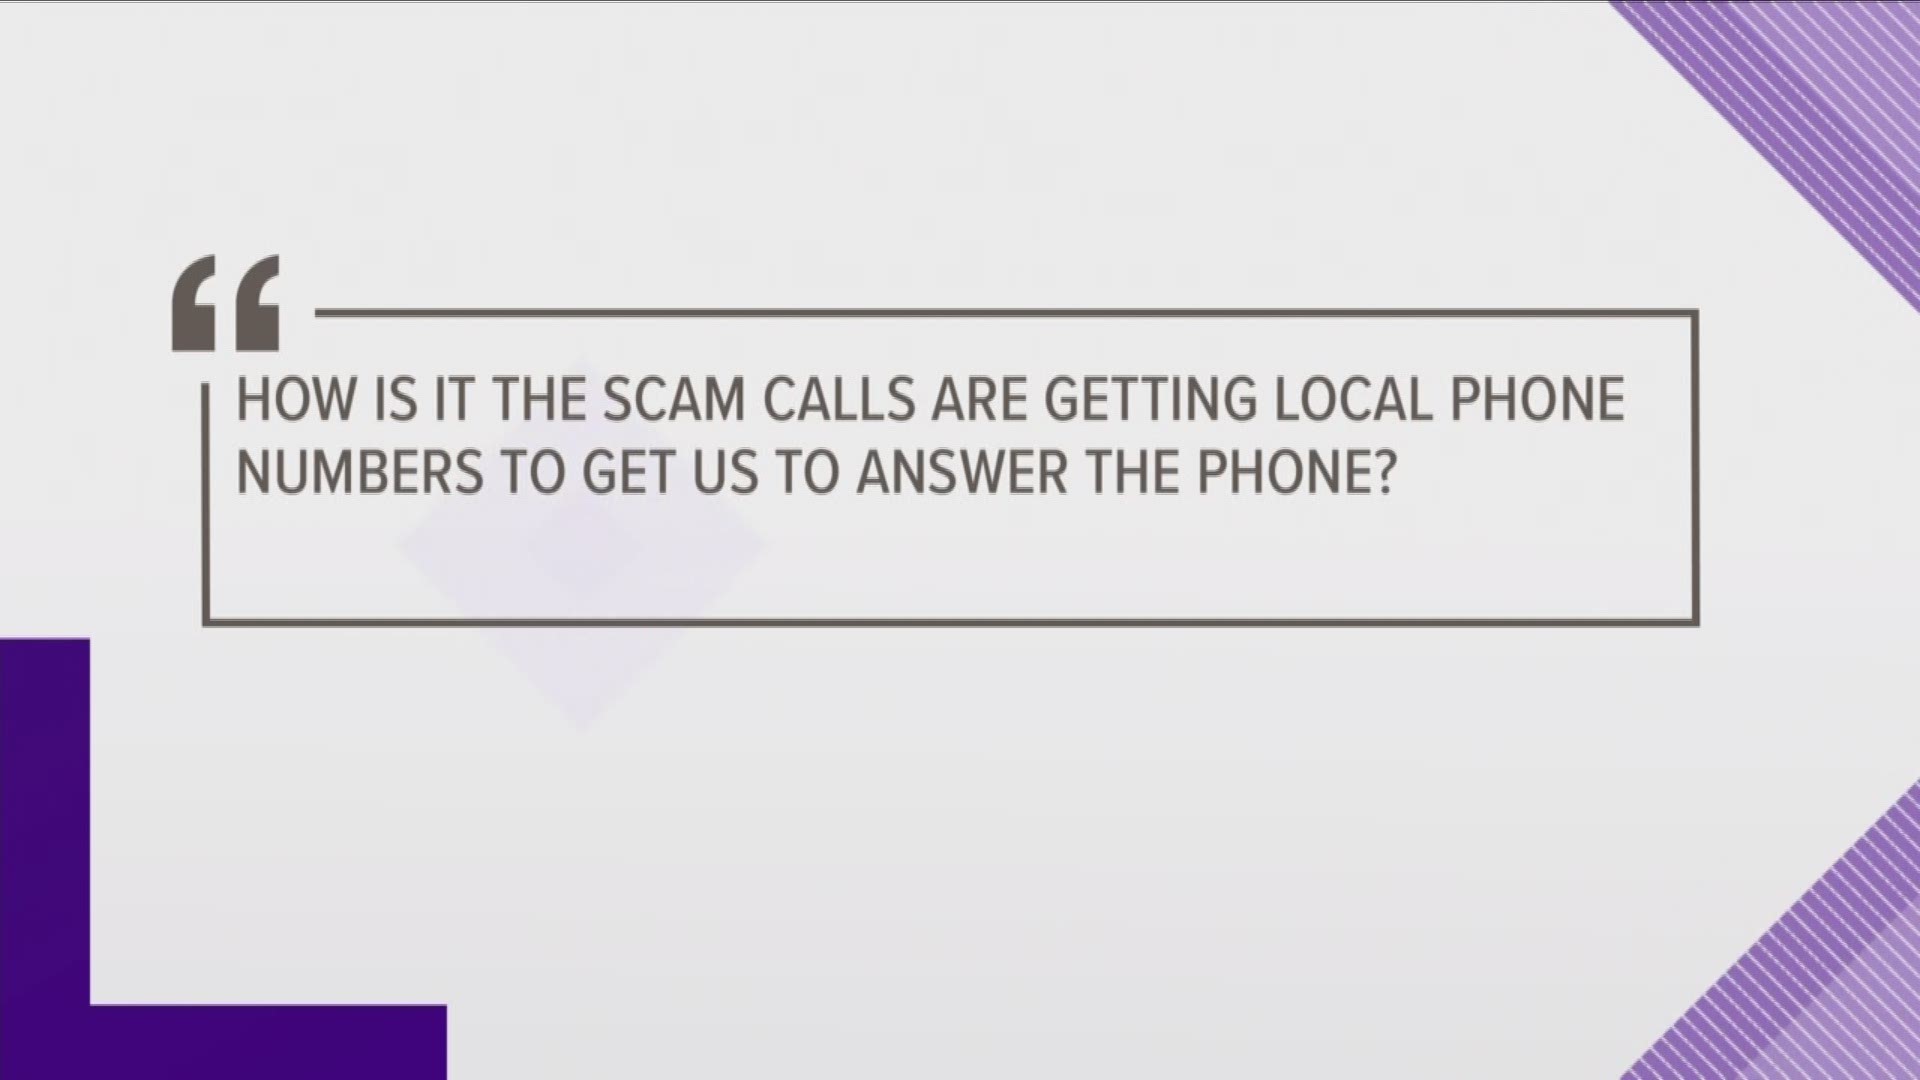 2WTK Viewers Asked About Phone Spoofing & Reporting Scam Calls